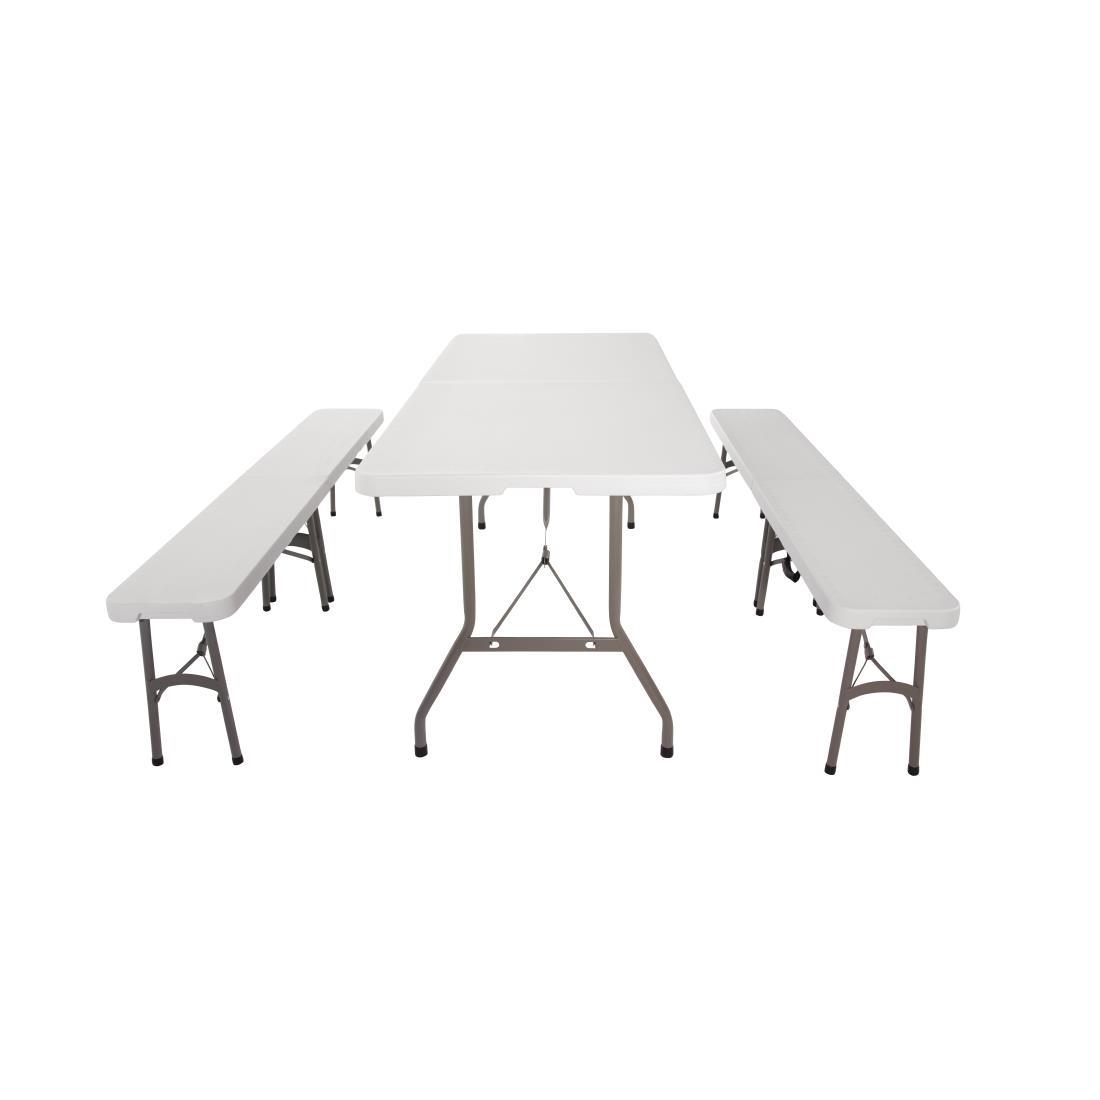 Special Offer Bolero PE Centre Folding Table 6ft with Two Folding Benches - SA425  - 3